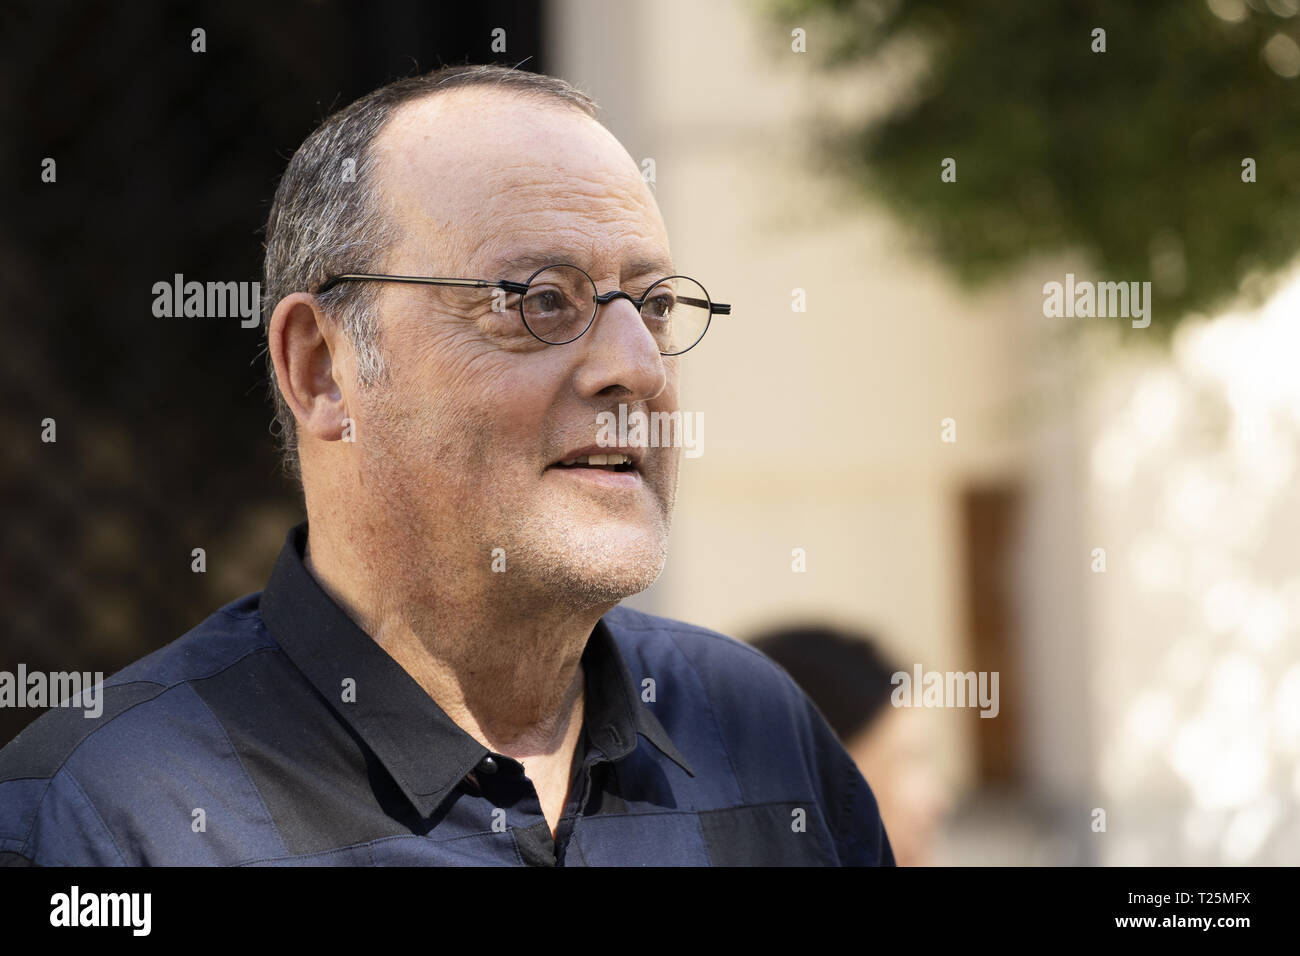 Jean Reno attends the '4 latas' photocall in Madrid  Featuring: Jean Reno Where: Madrid, Spain When: 27 Feb 2019 Credit: Oscar Gonzalez/WENN.com Stock Photo